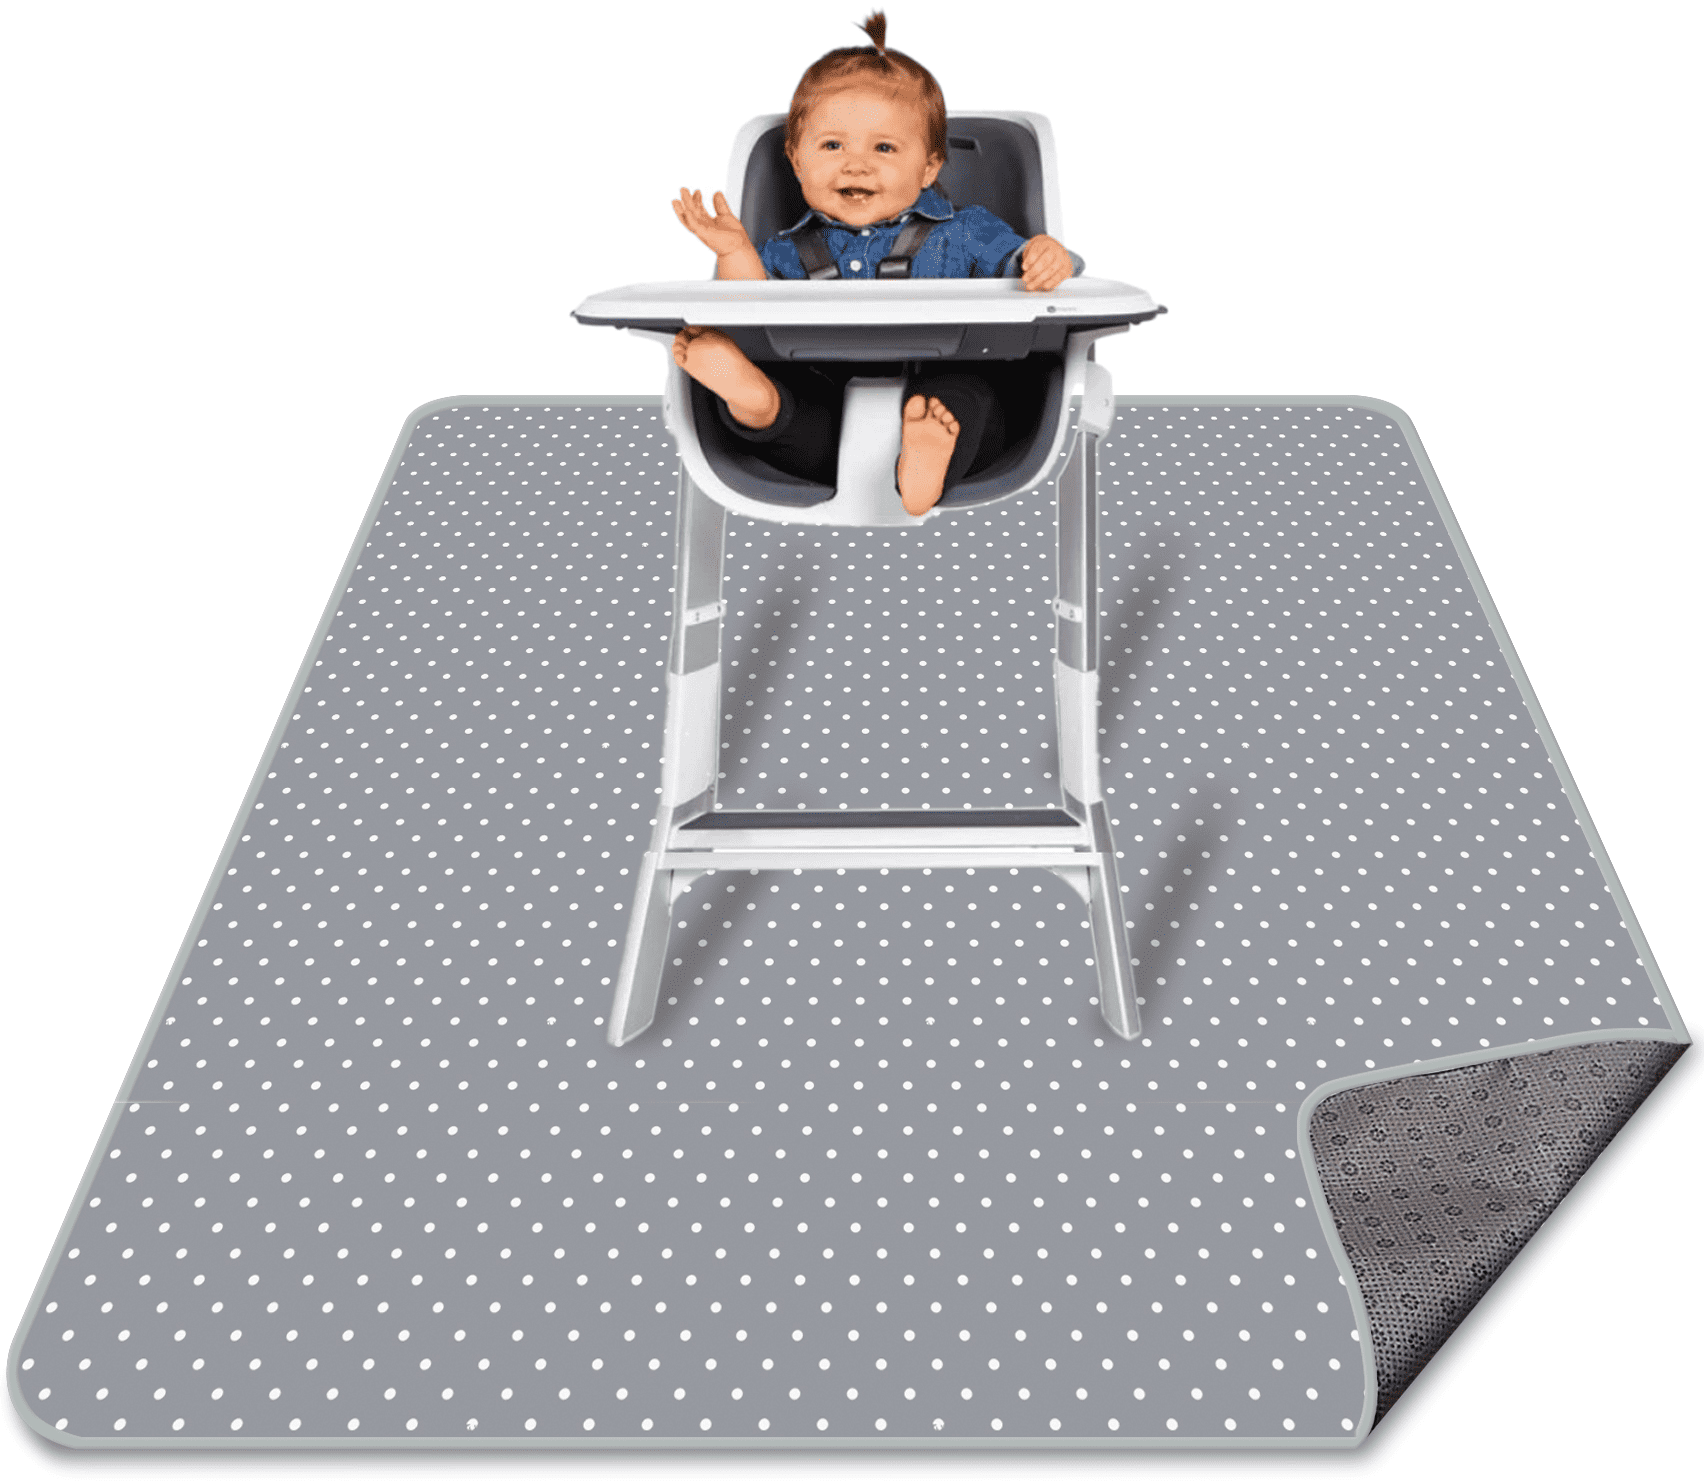 EXTRA LARGE HEAVY DUTY NO MESS PVC SPLASH MAT FLOOR TABLE COVER WIPE CLEAN BABY 